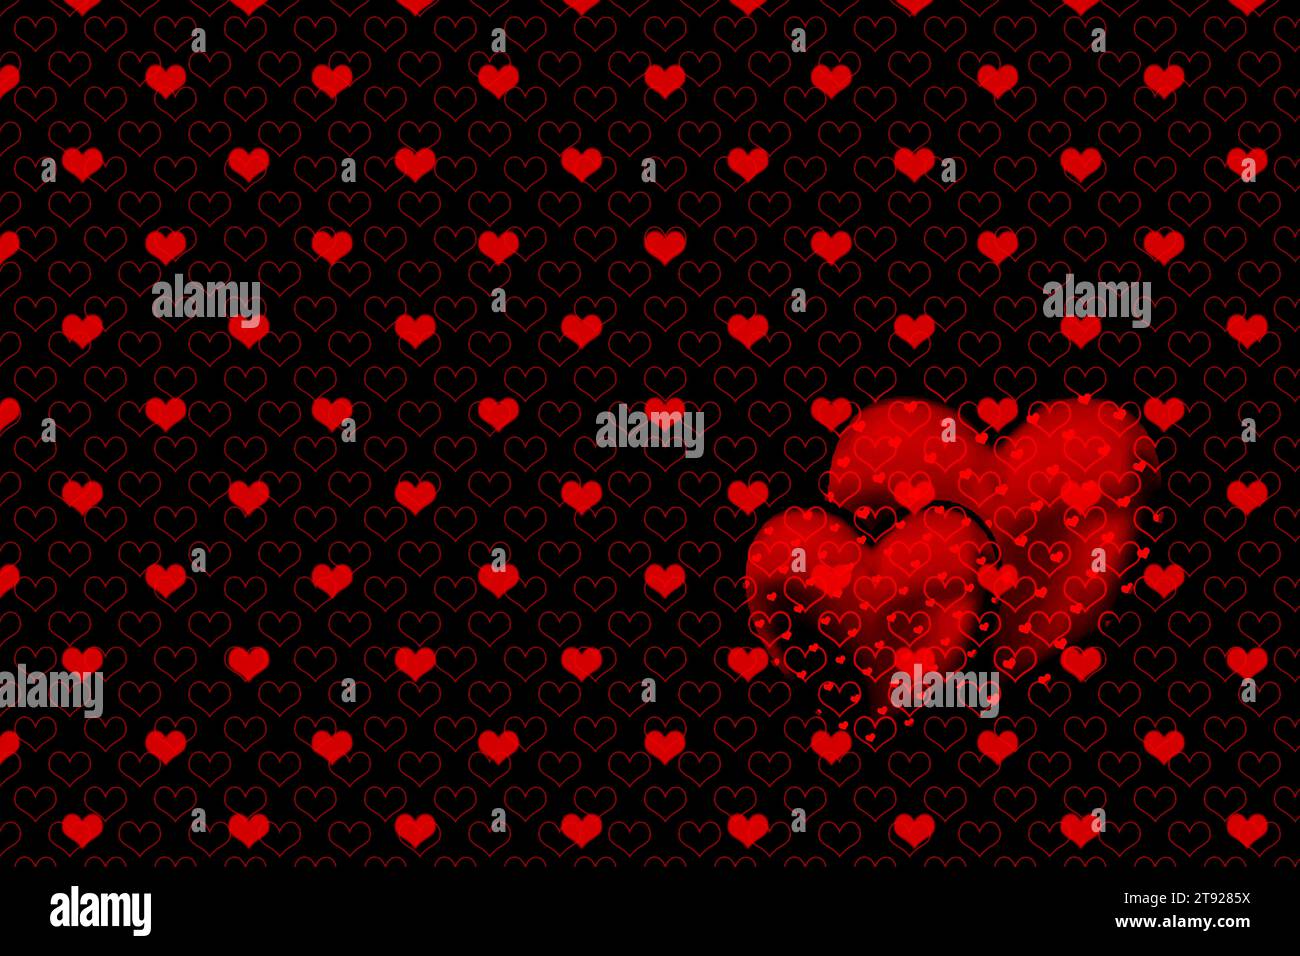 Abstract picture of the heart. Creative marbling heart pattern background texture Stock Photo